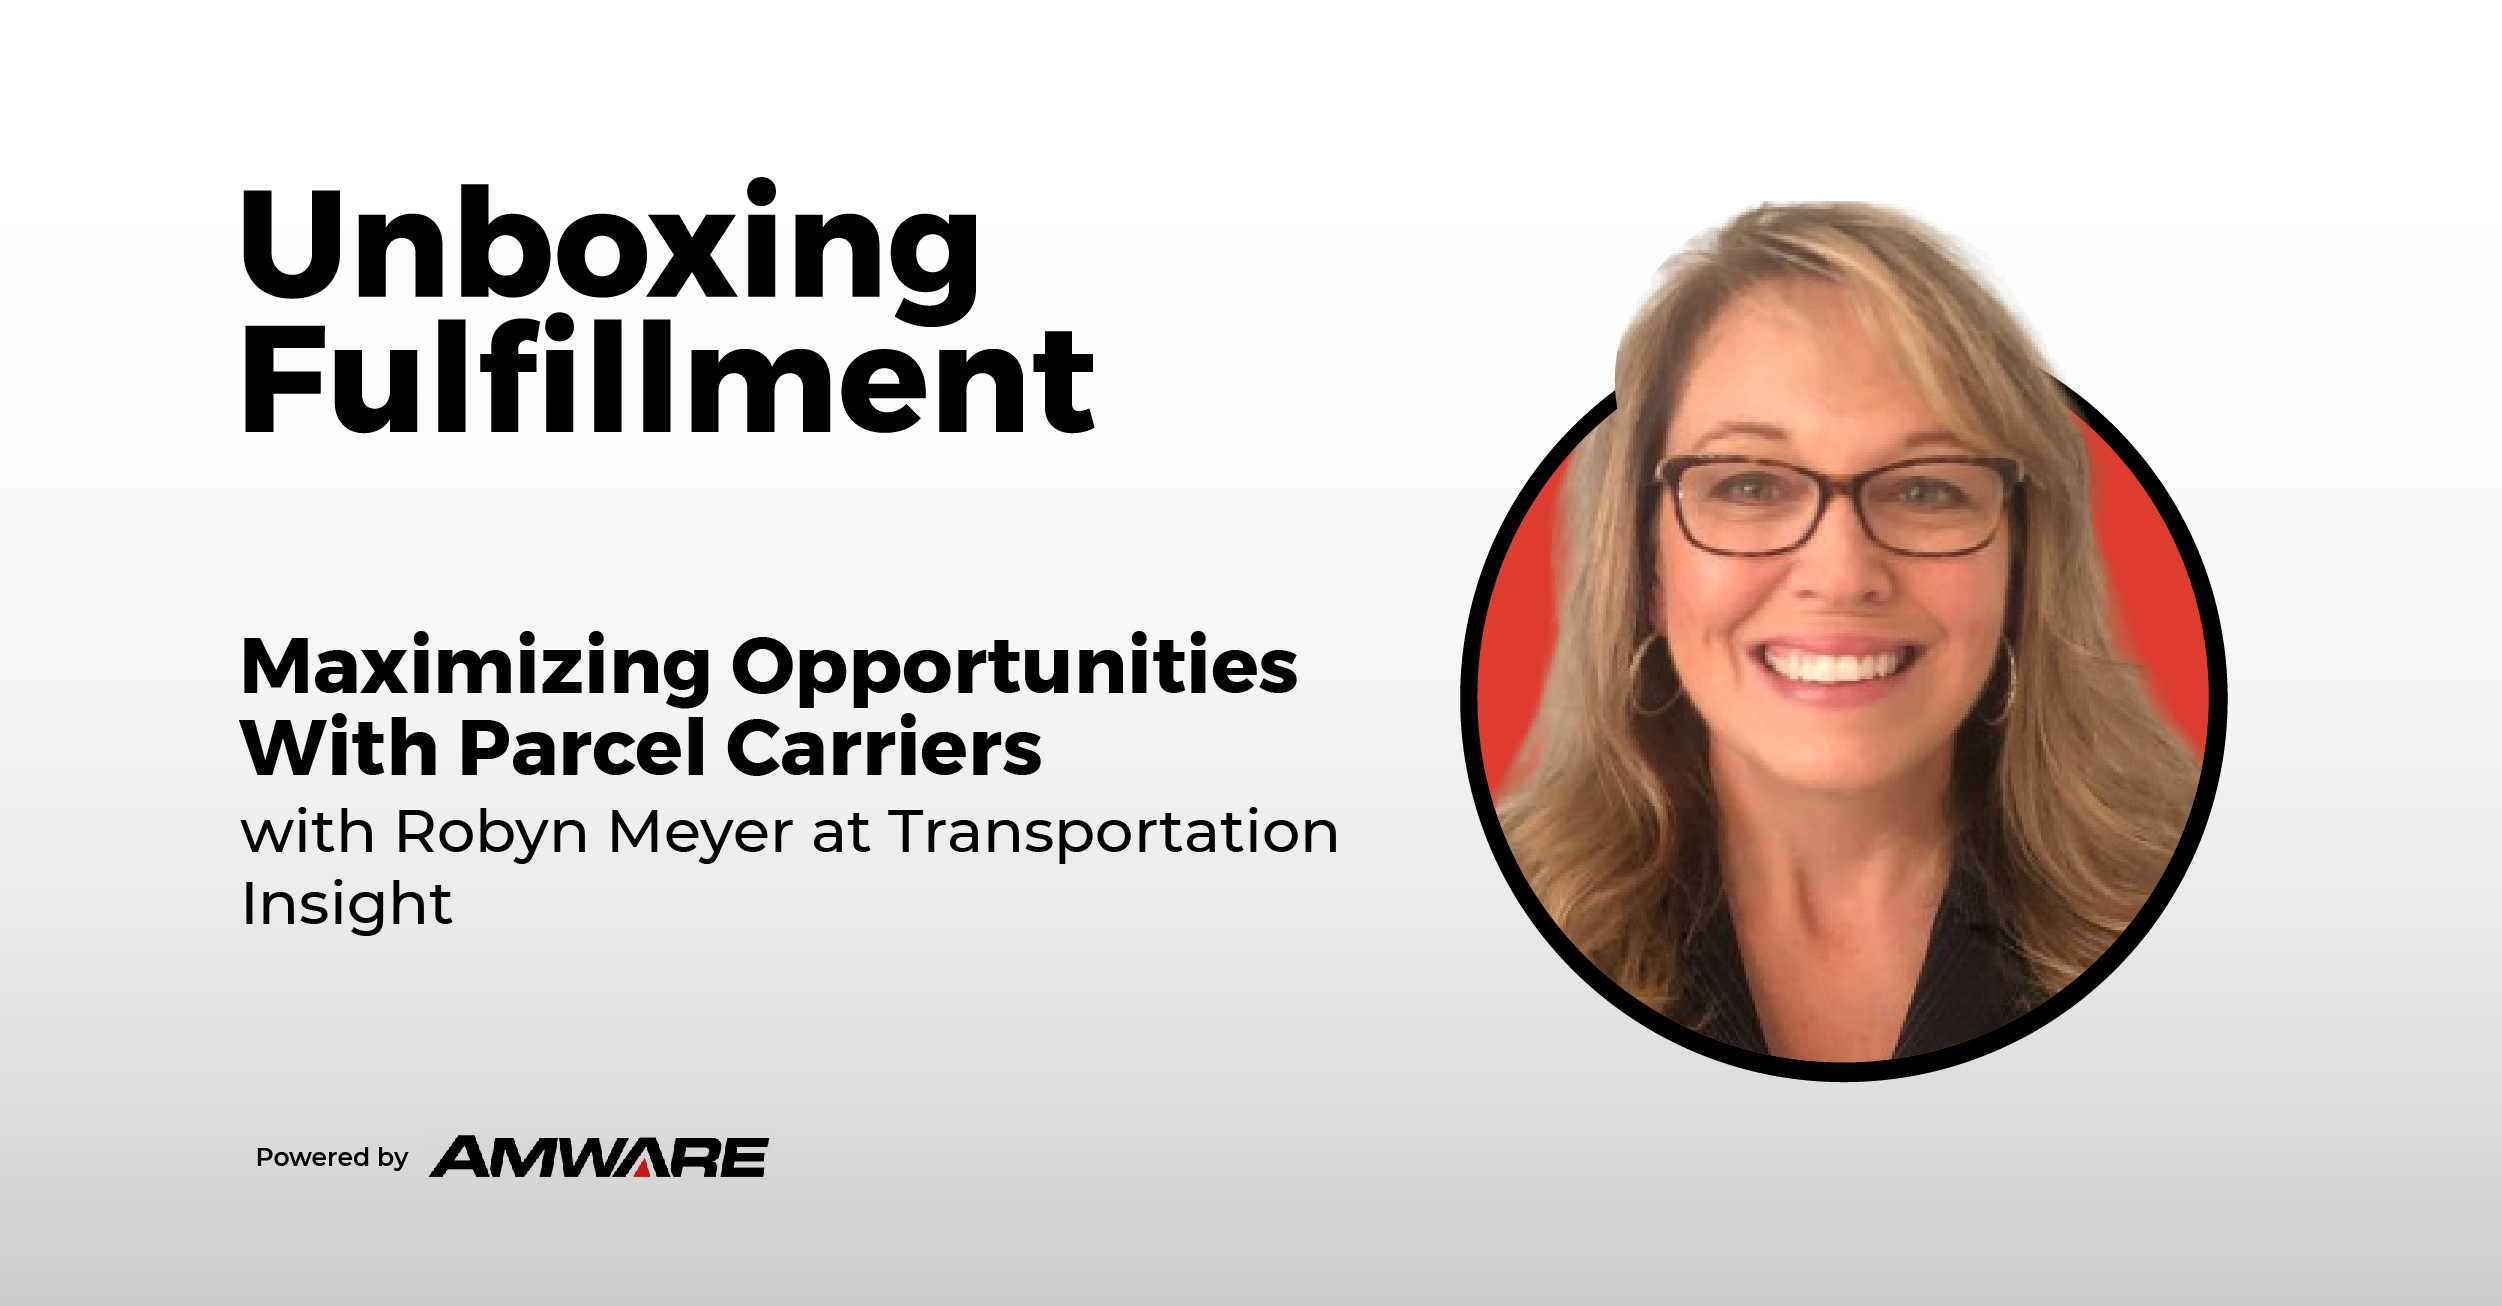 Maximizing Opportunities With Parcel Carriers with Robyn Meyer at Transportation Insight